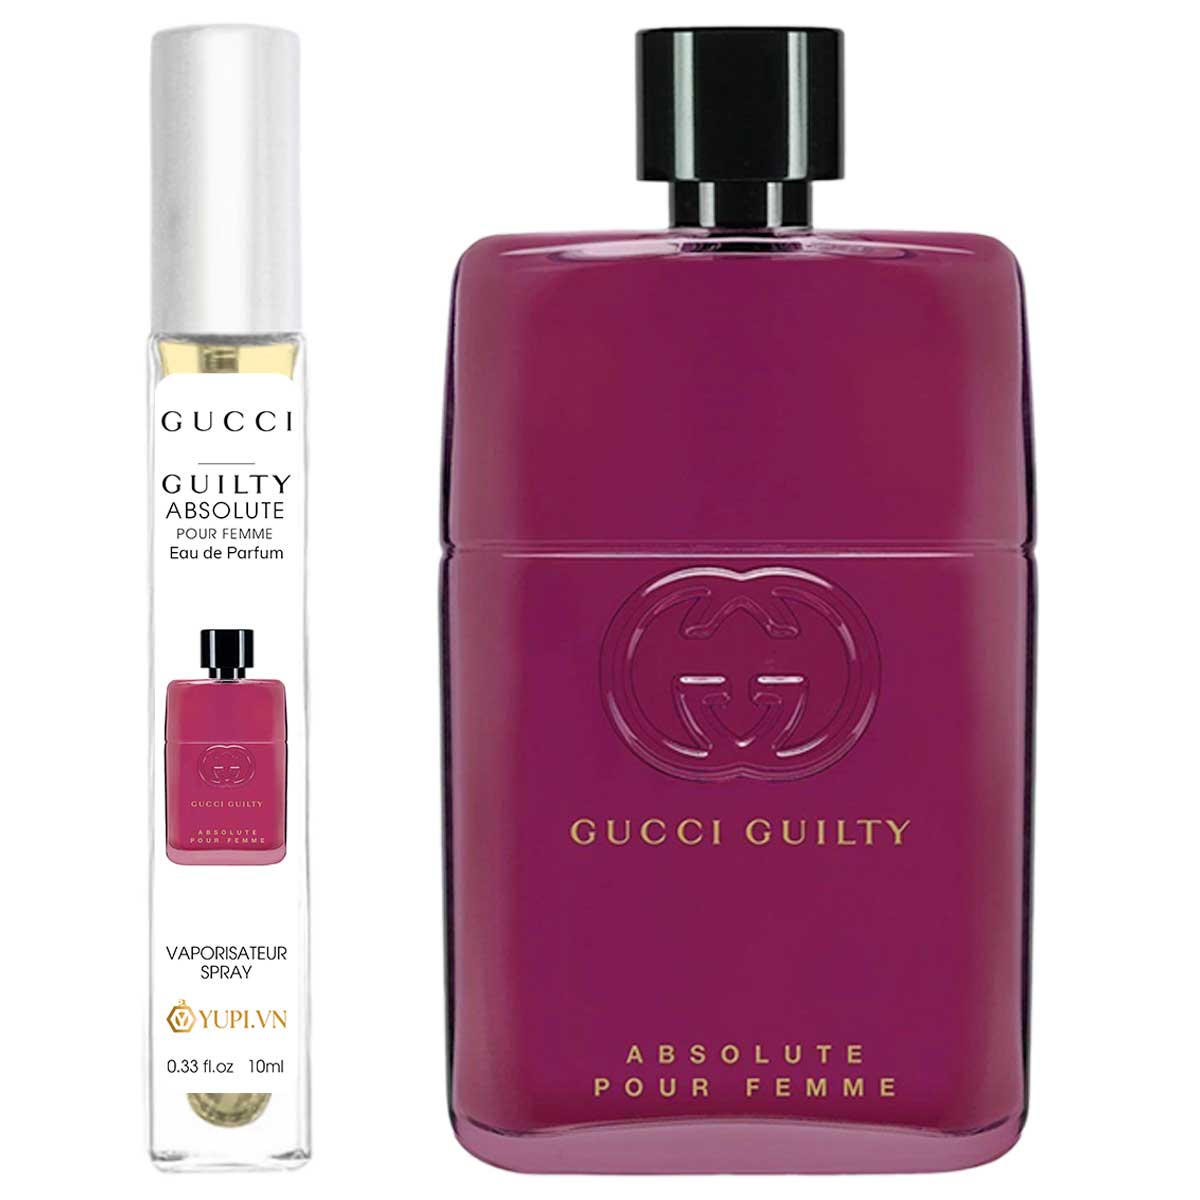 Gucci Guilty Absolute Pour Femme EDP Chiết 10ml